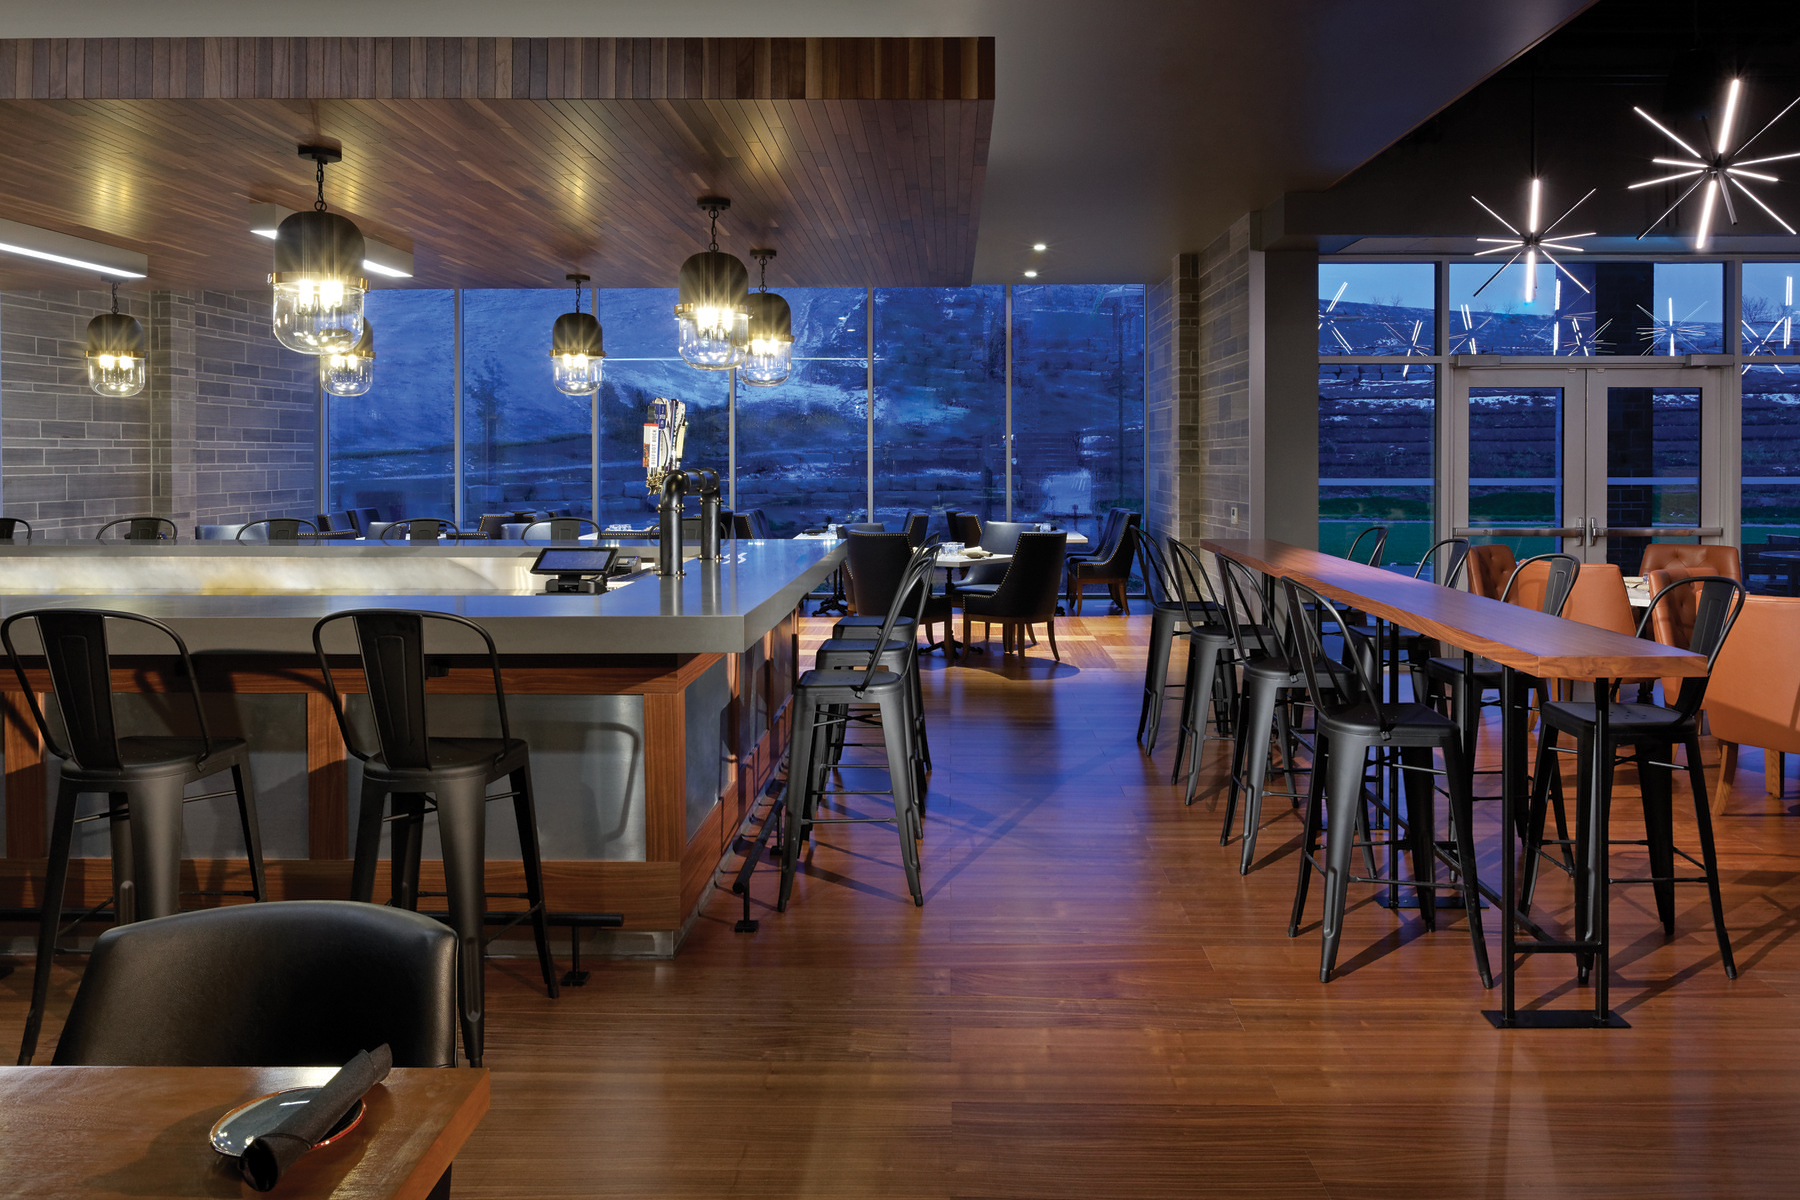 Square bar with feature lighting and black bar stools and bench and banquet seating with exterior views